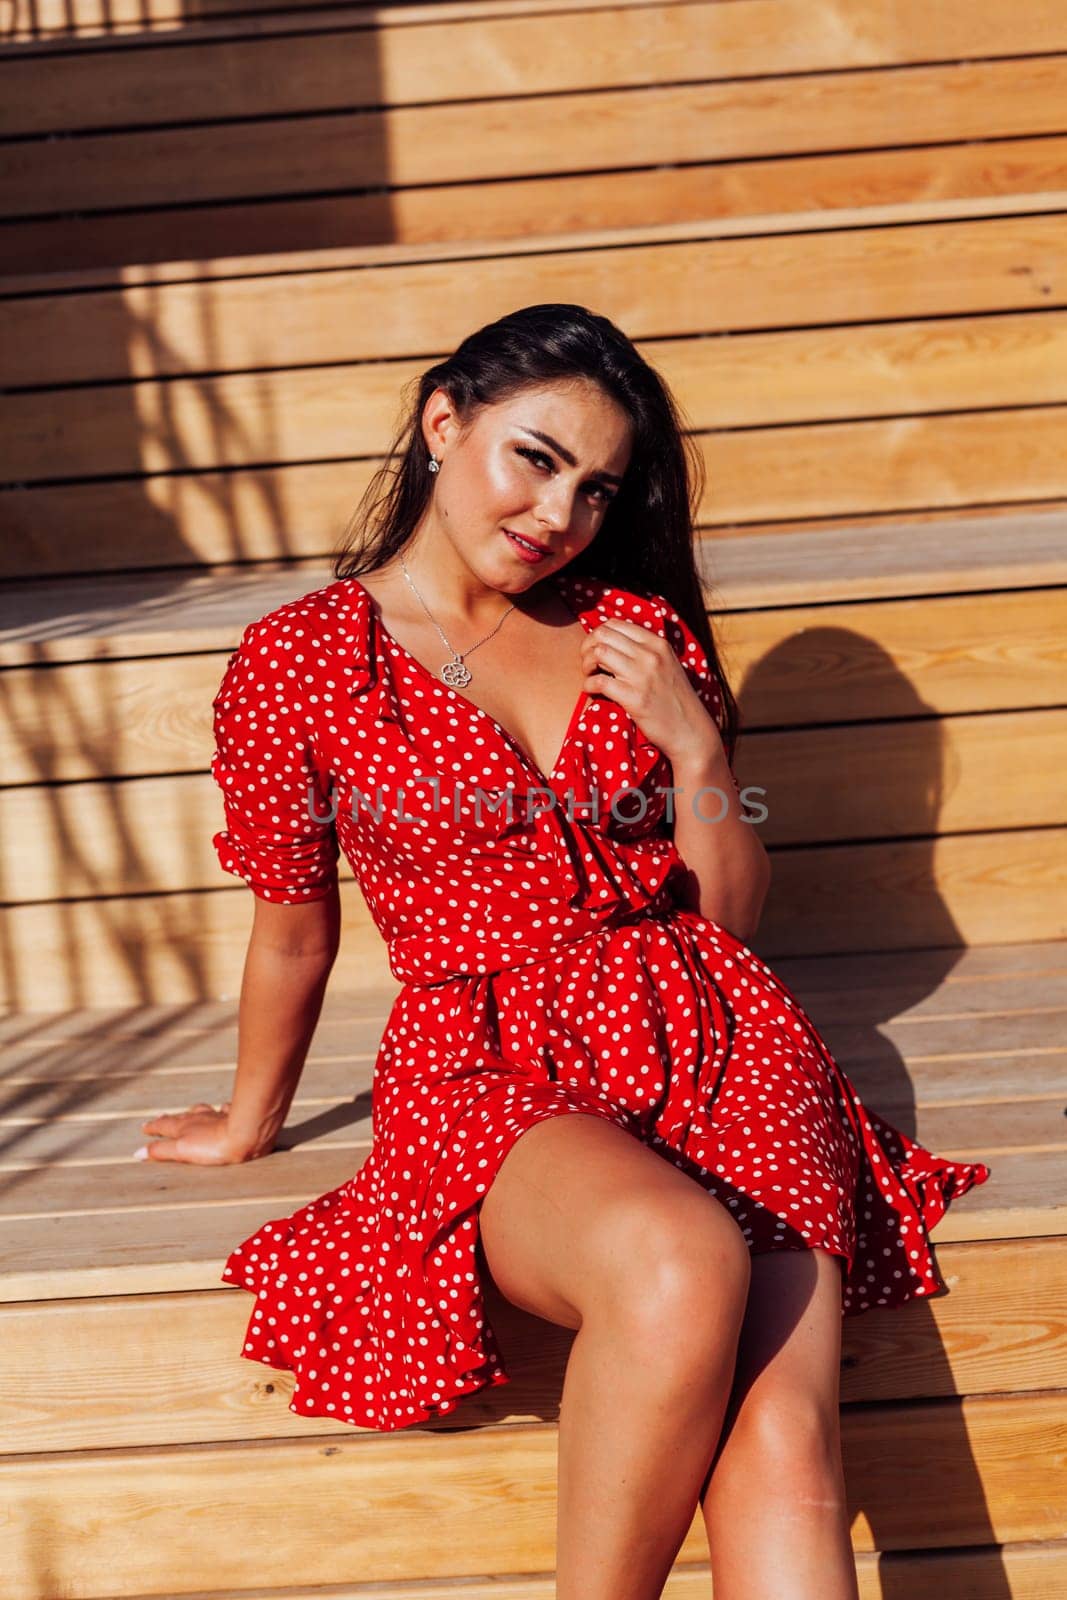 a brunette woman in a red dress sits on wooden steps by Simakov